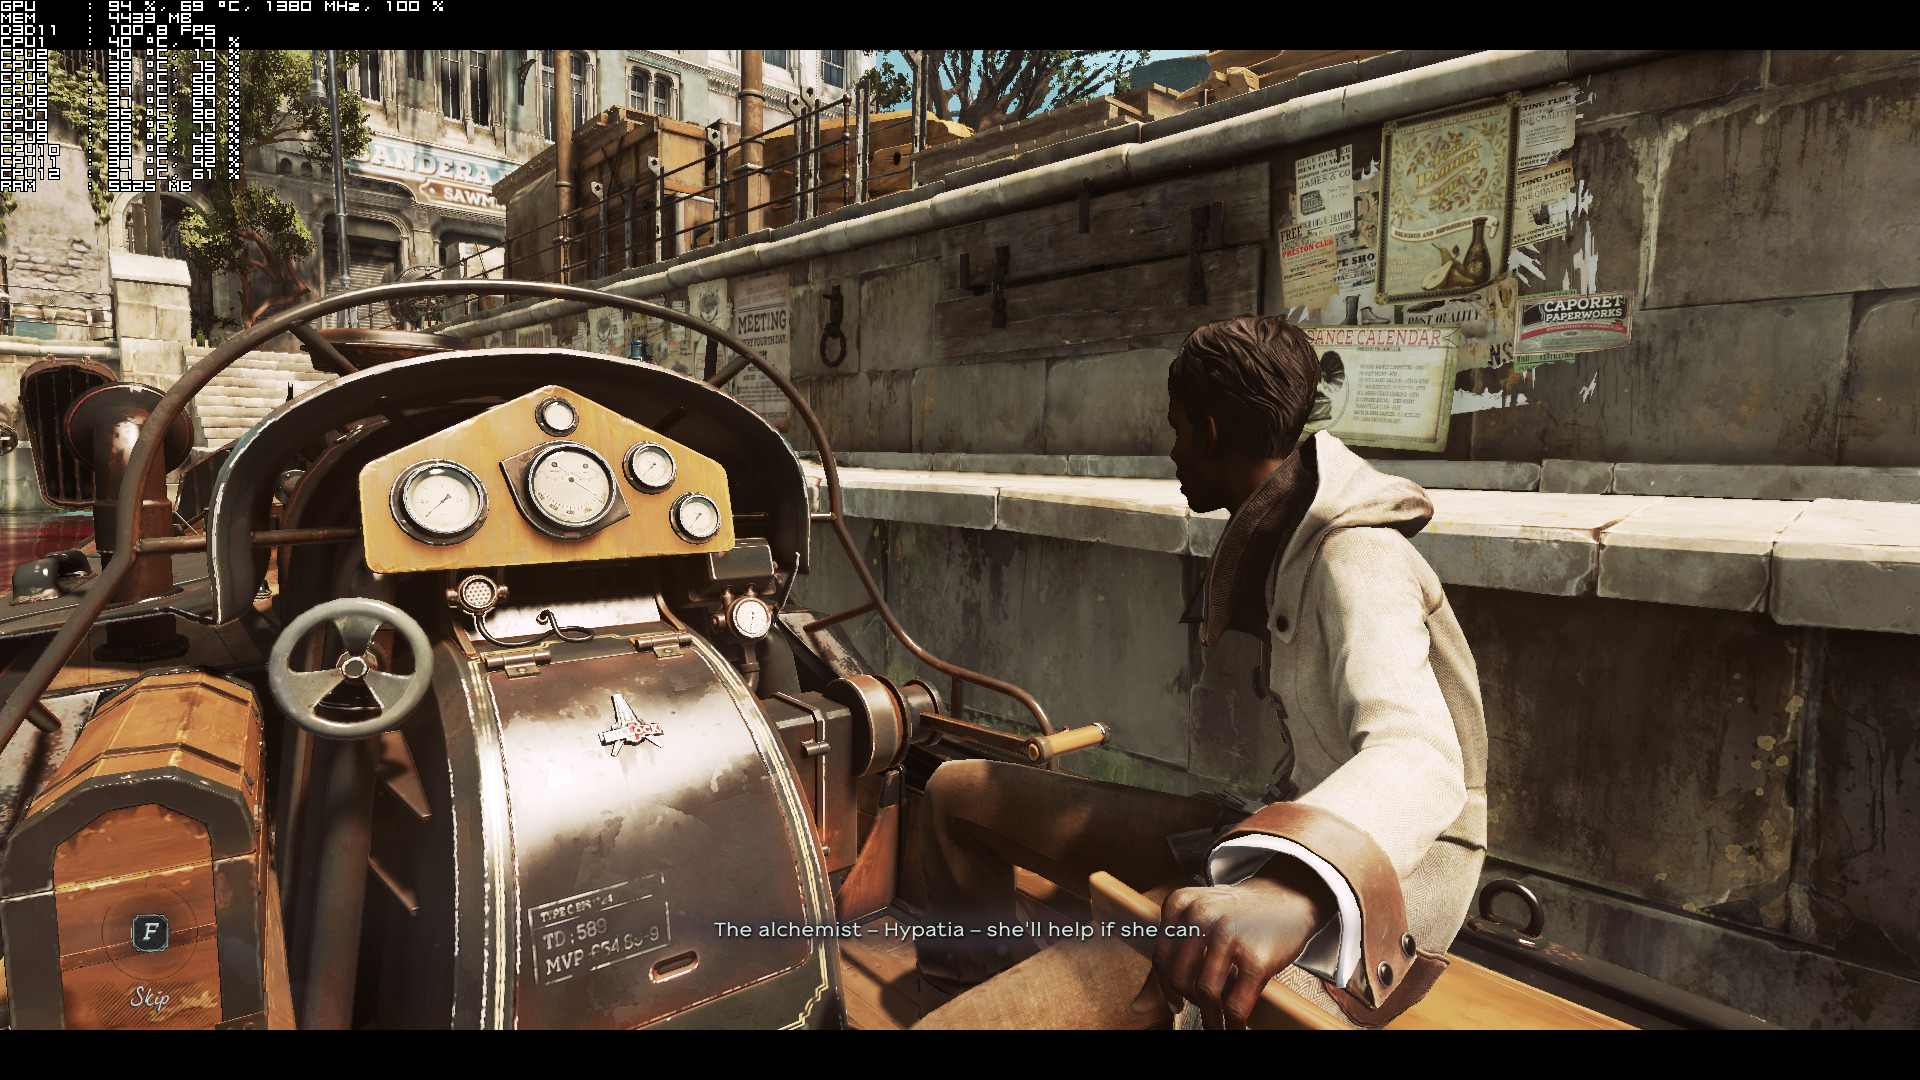 free download dishonored 2 pc